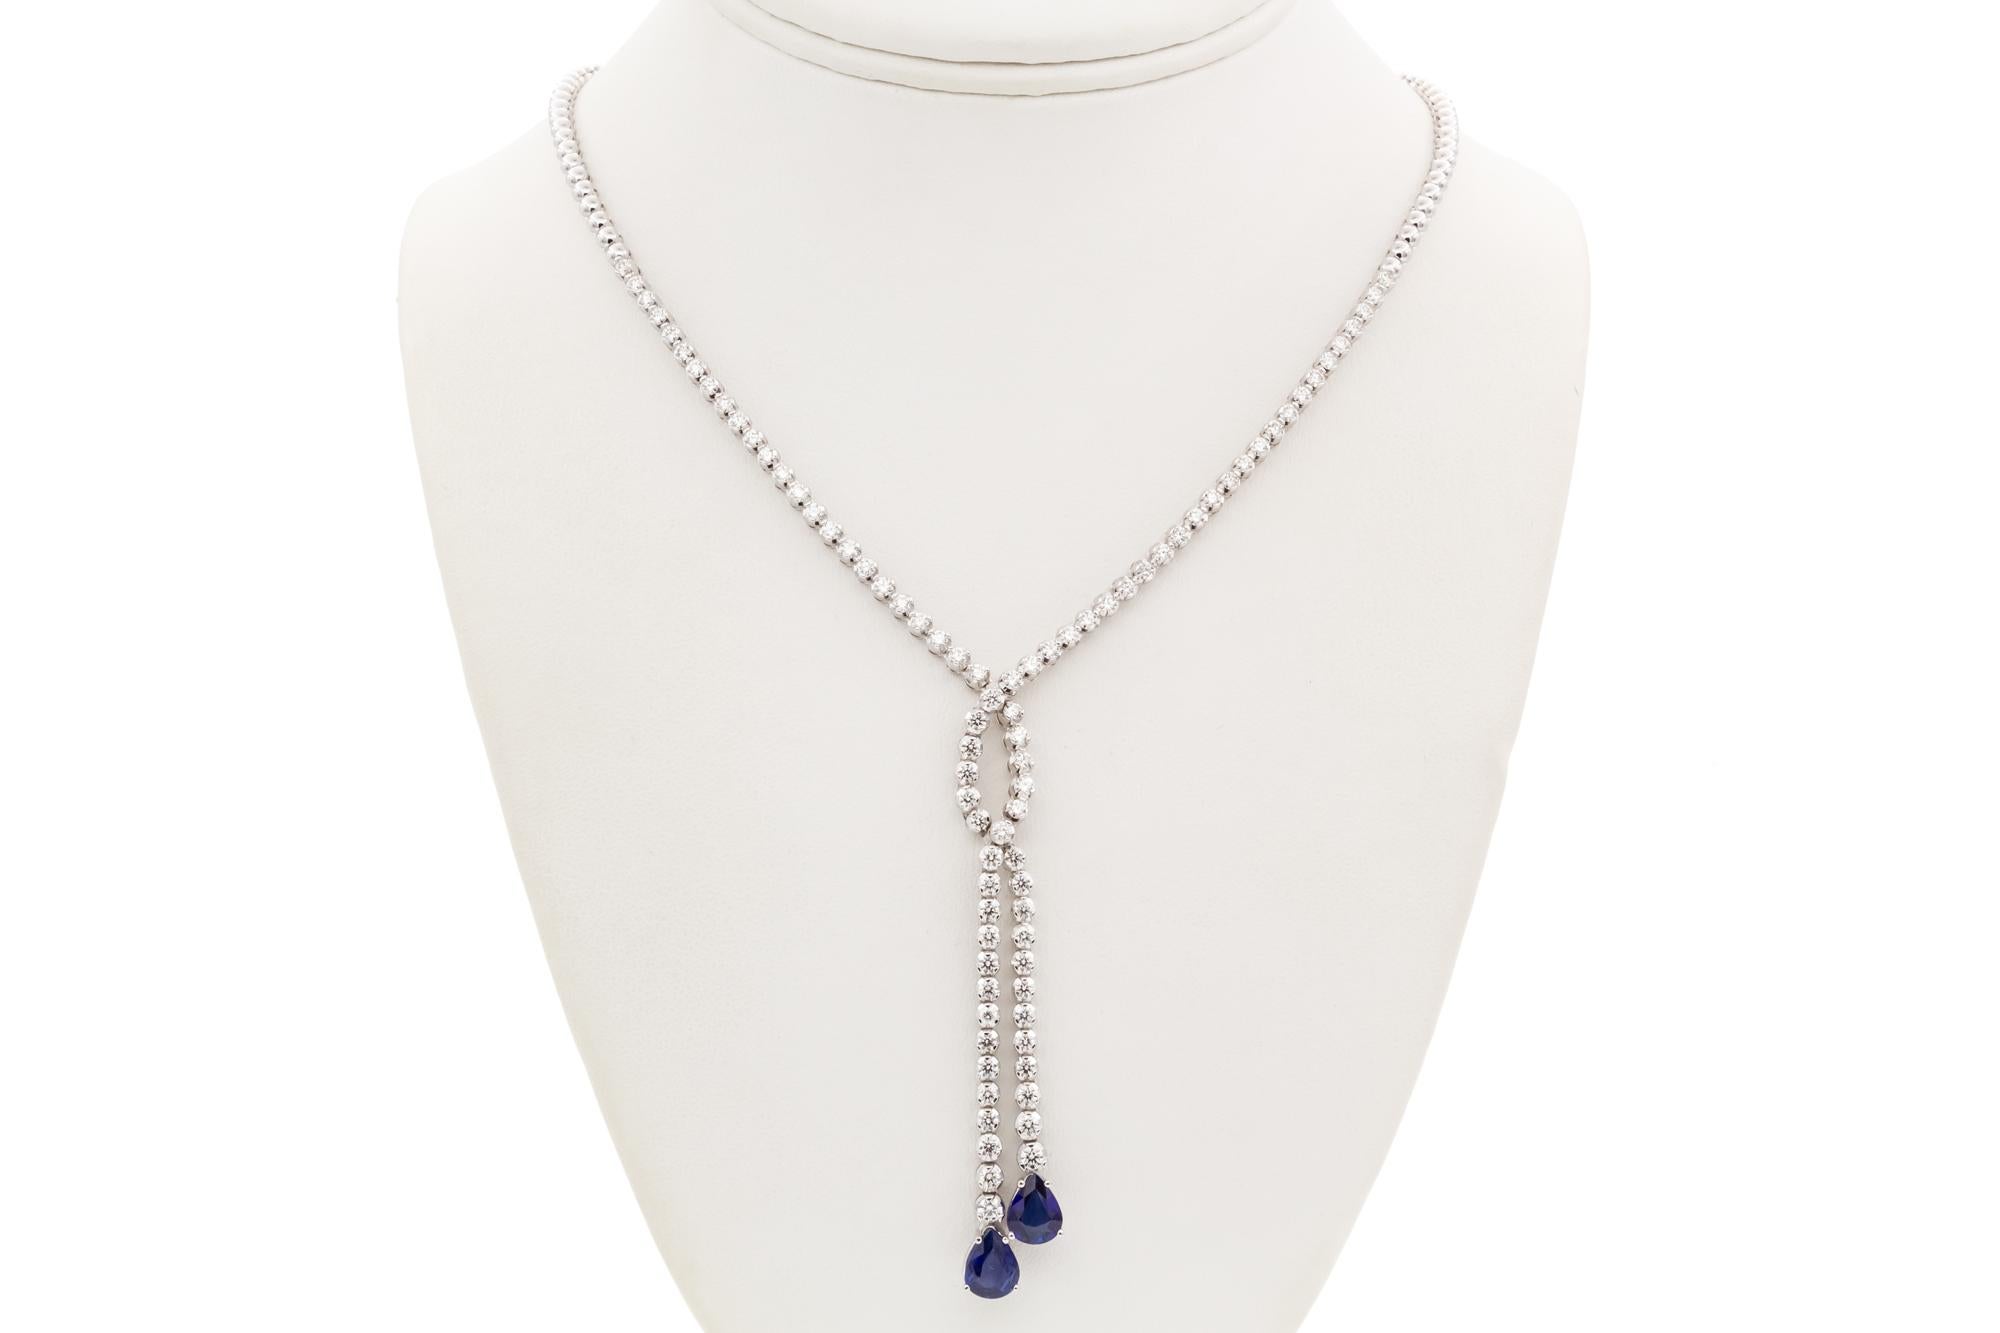 18k White Gold Diamond & Sapphire Double Drop Necklace 5.00ctw/3.11ctw In Excellent Condition For Sale In Tustin, CA